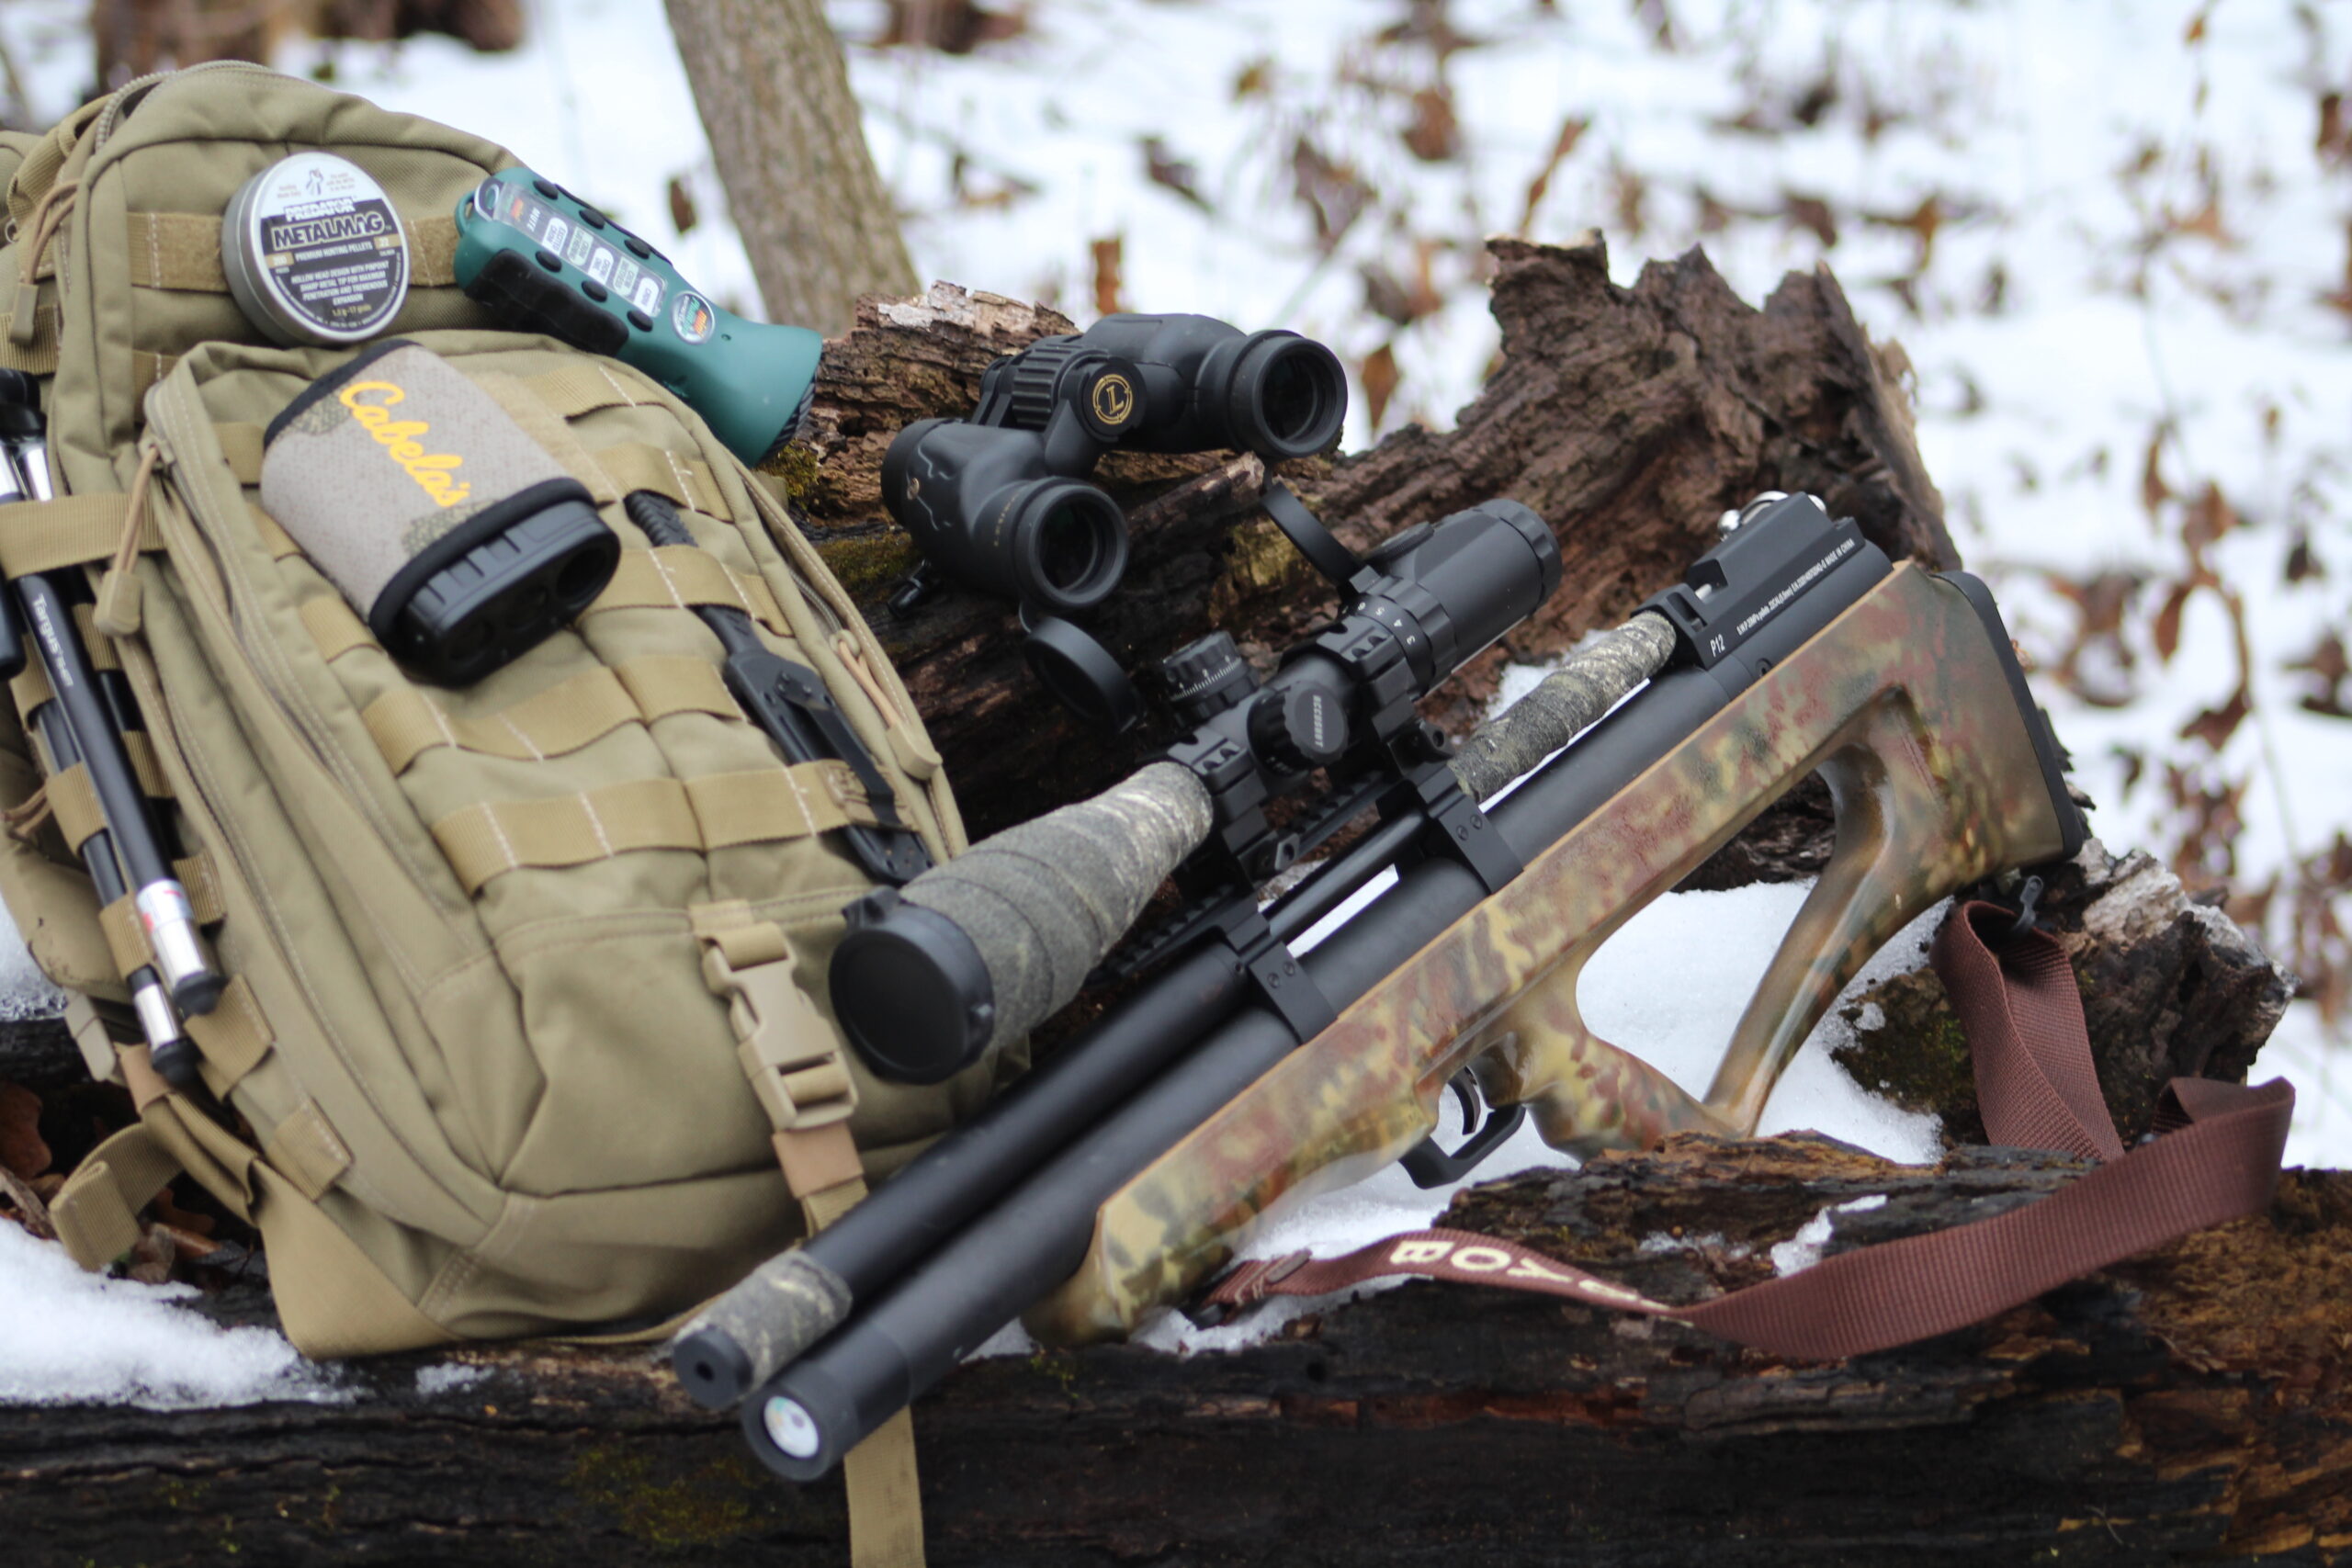 The Hatsan Flashpup QE is short and handy squirrel rifle